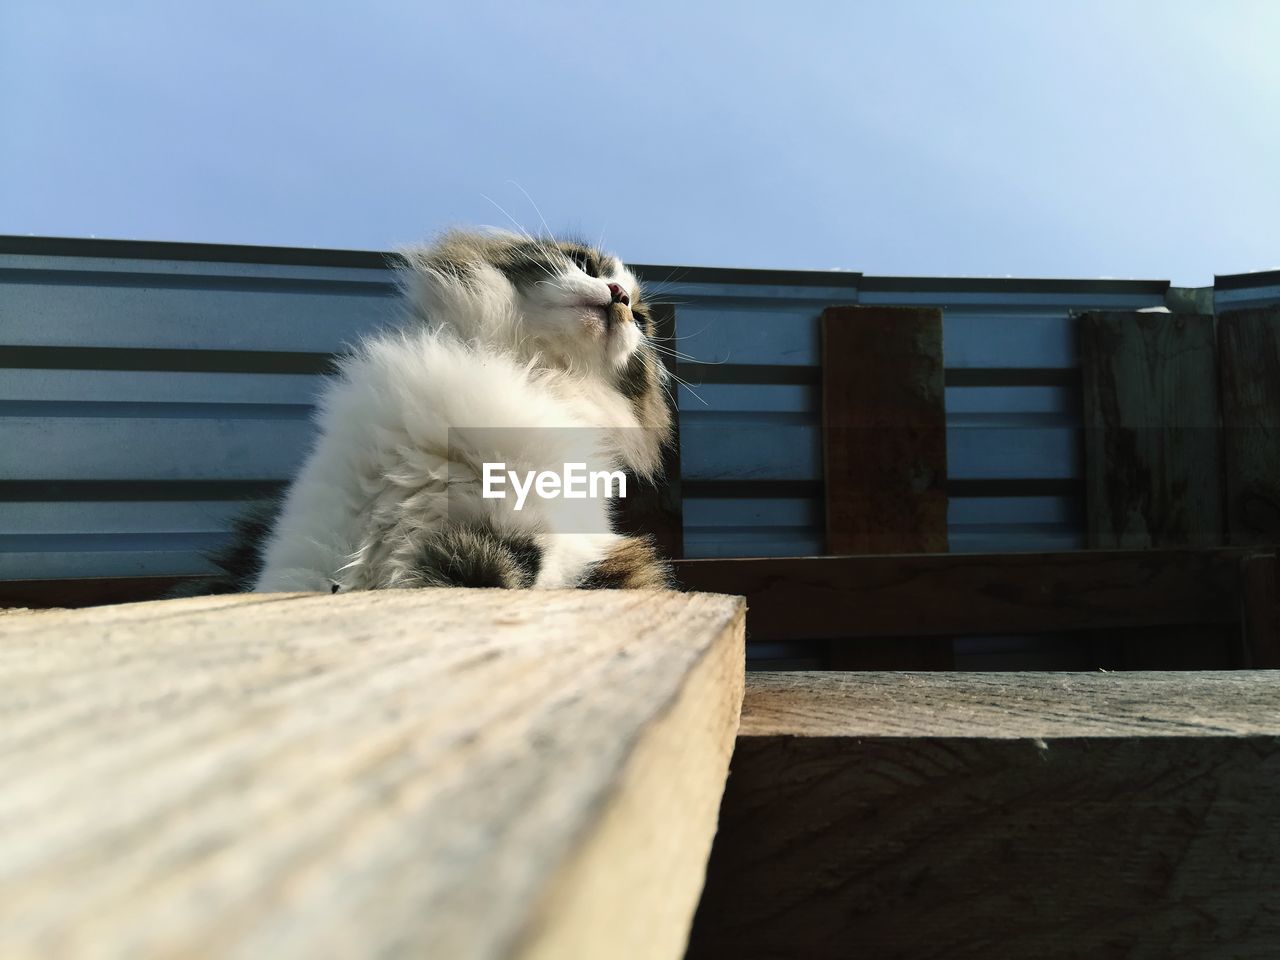 Cat looking away while standing on railing against sky